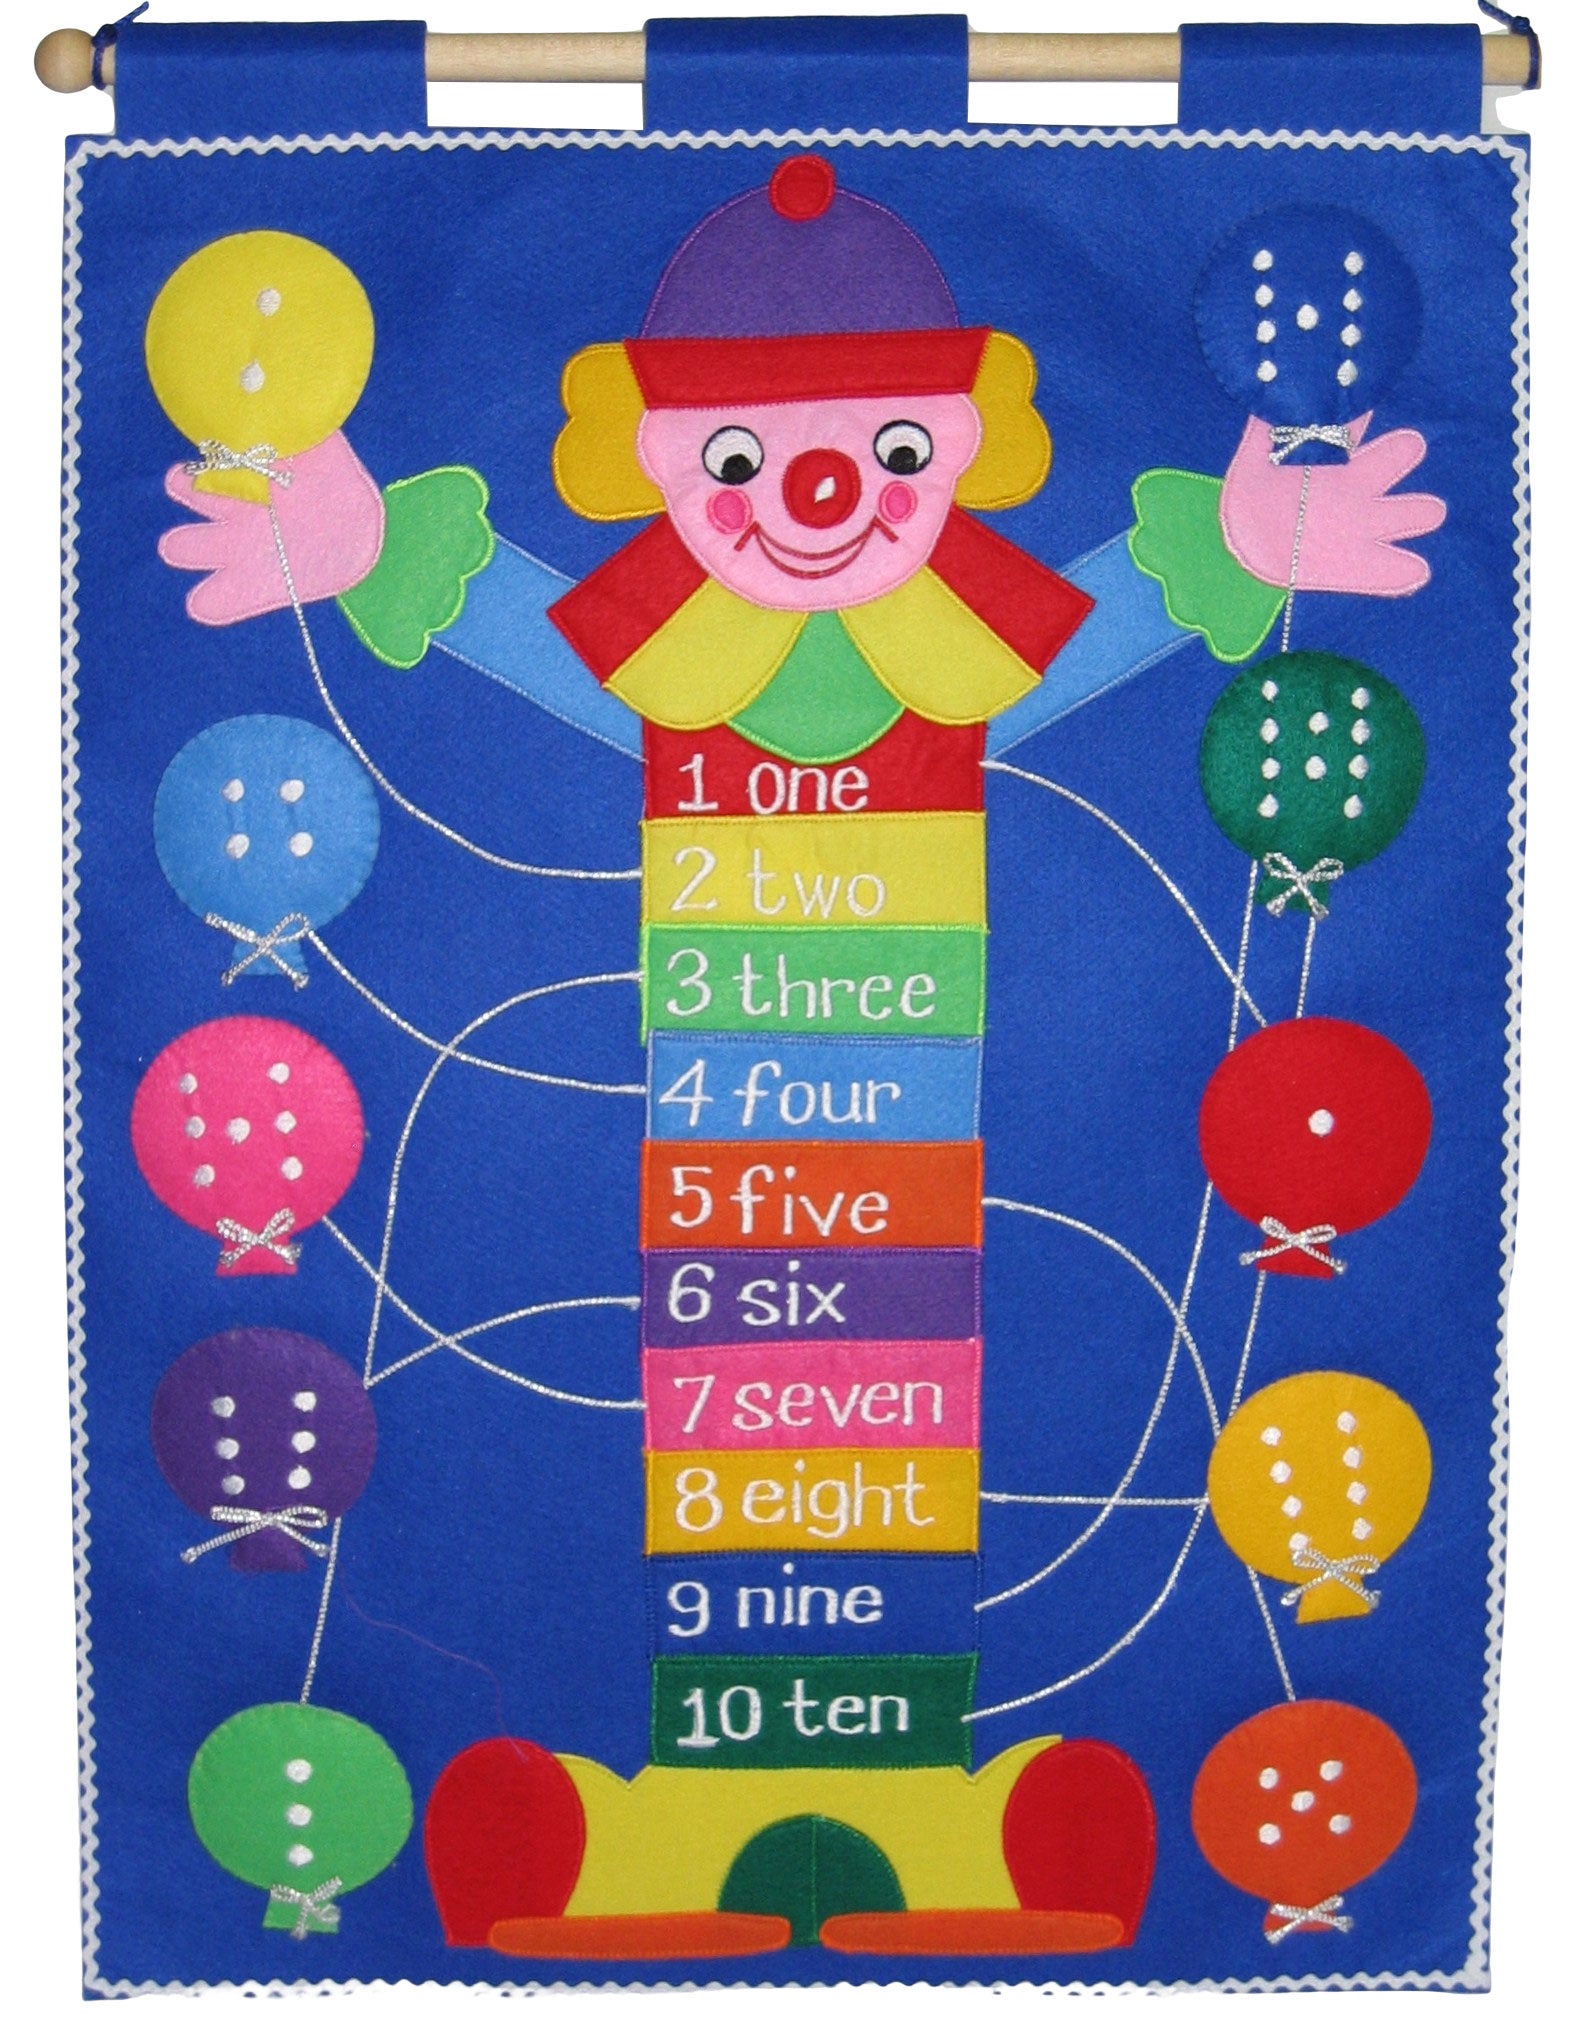 My Numbers Clown - Tactile Imagery for Toddlers